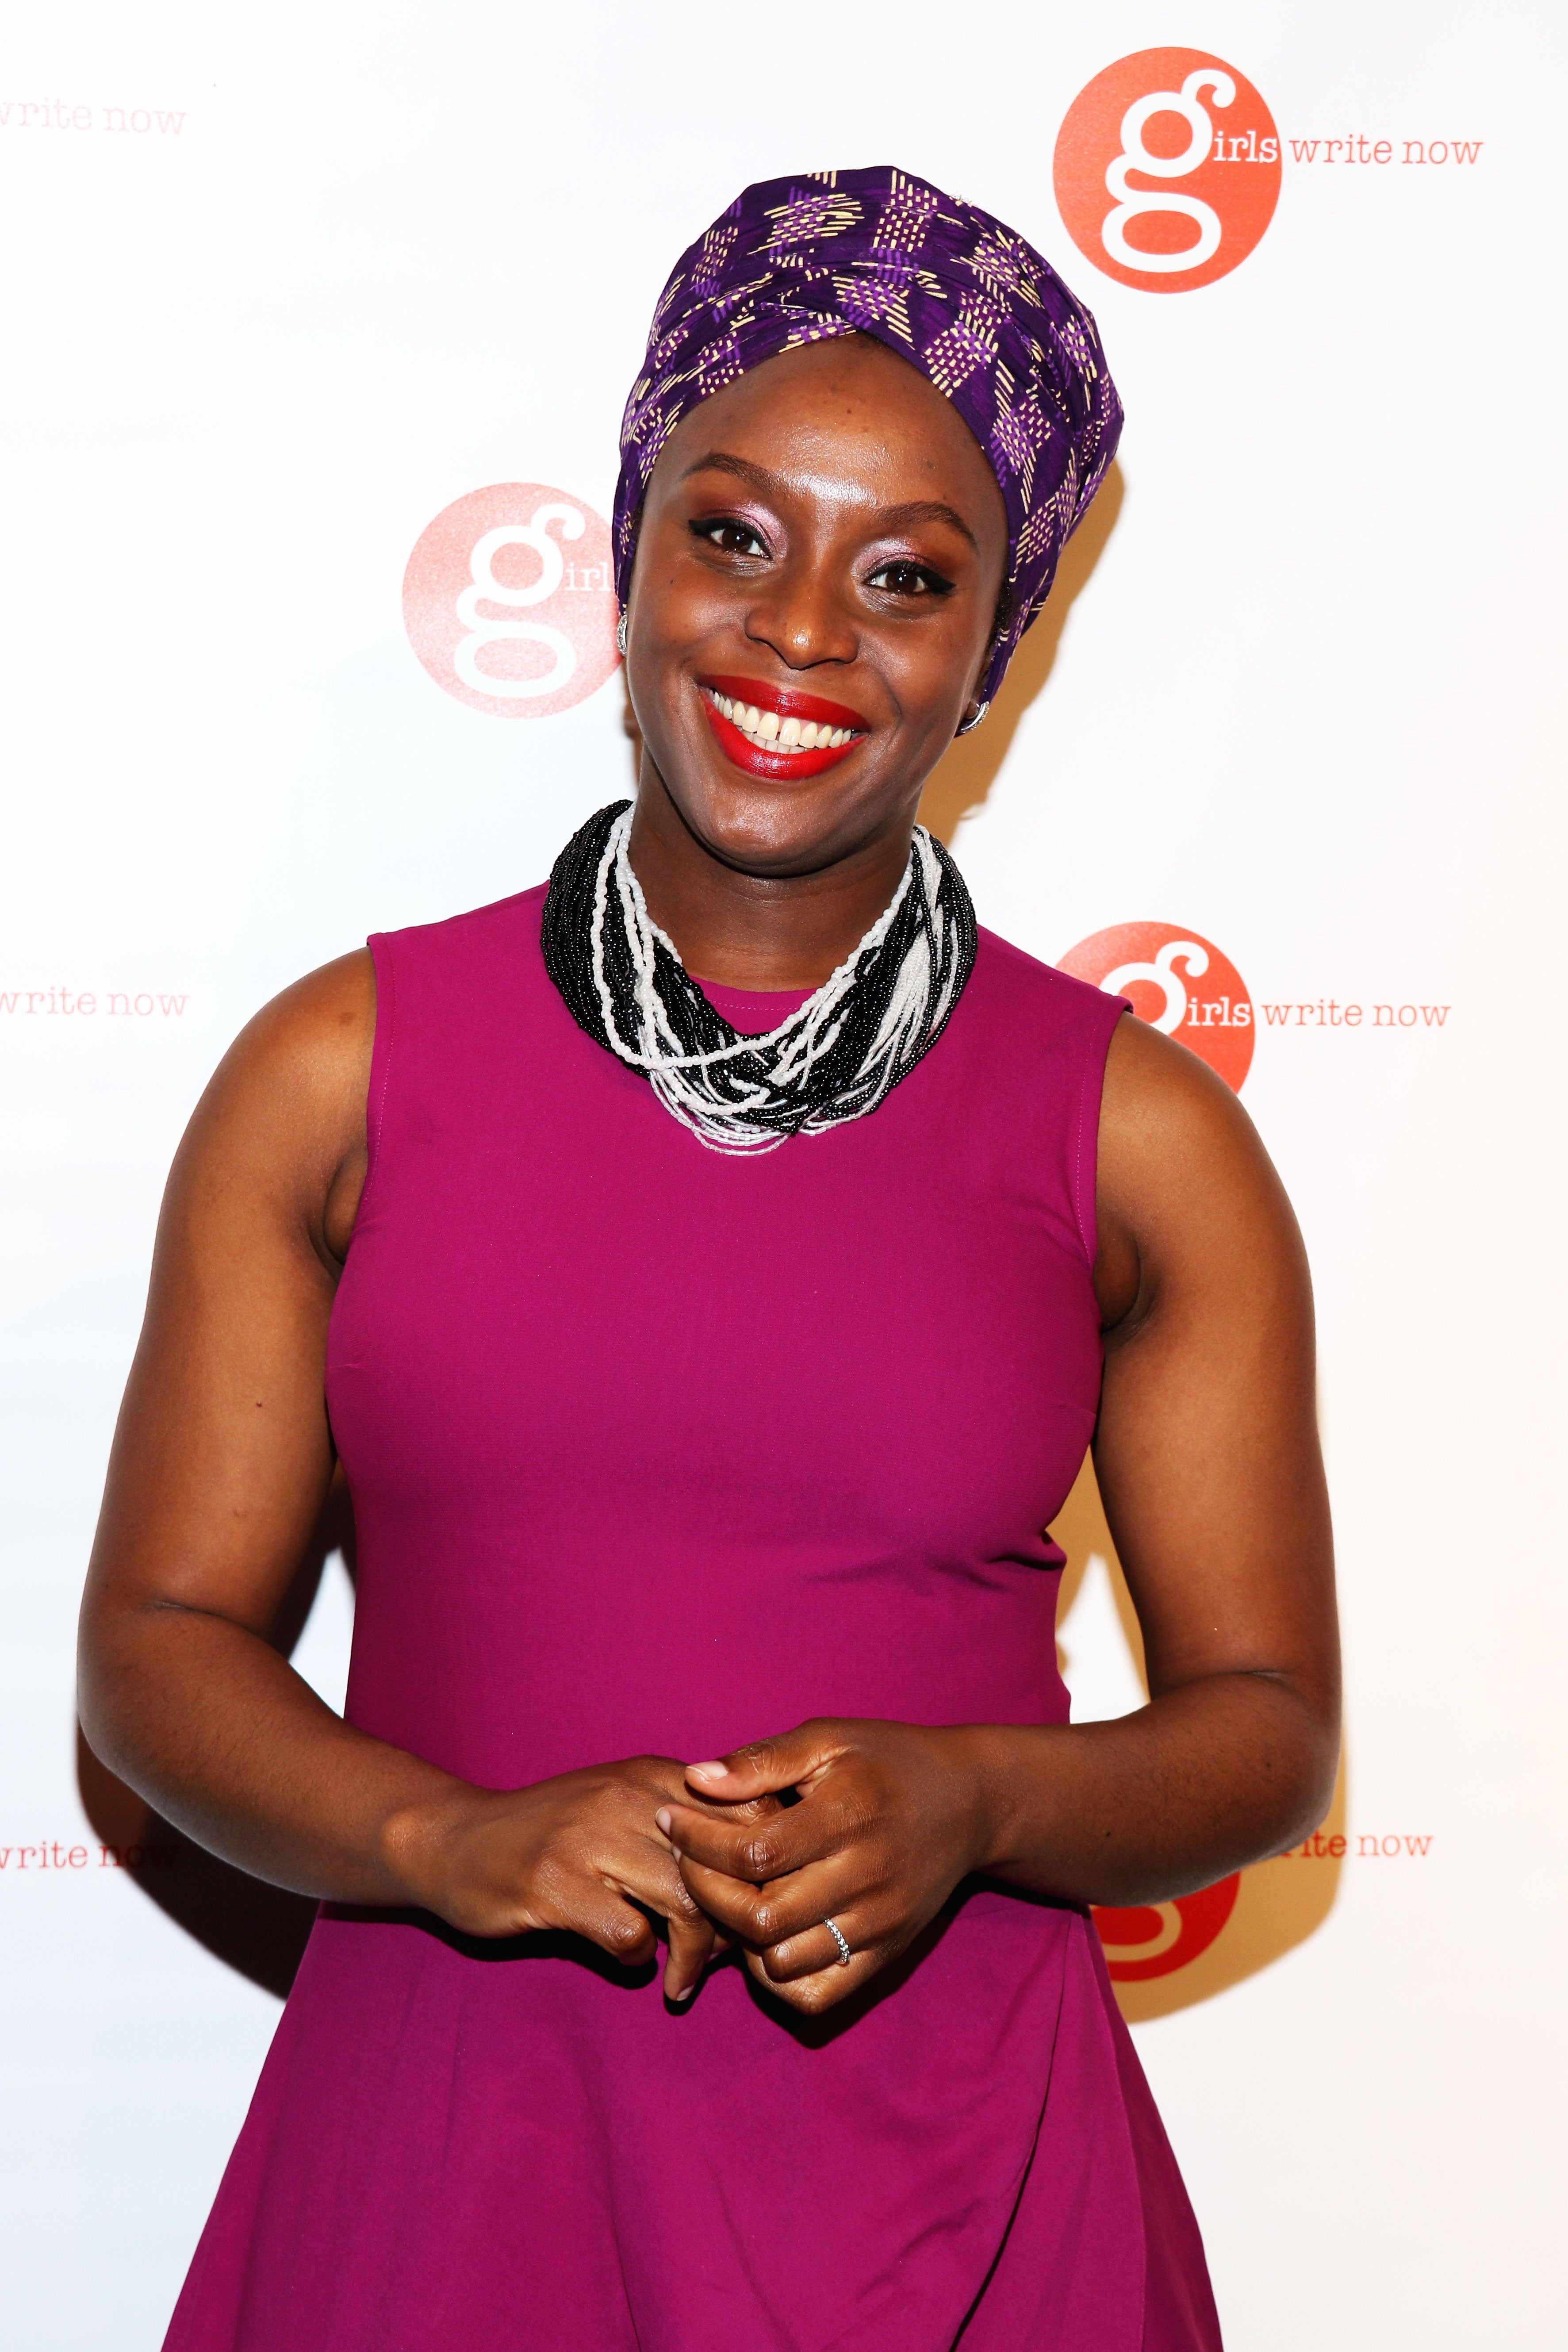 Another Chimamanda Ngozi Adichie Story Is Being Adapted Into a Film